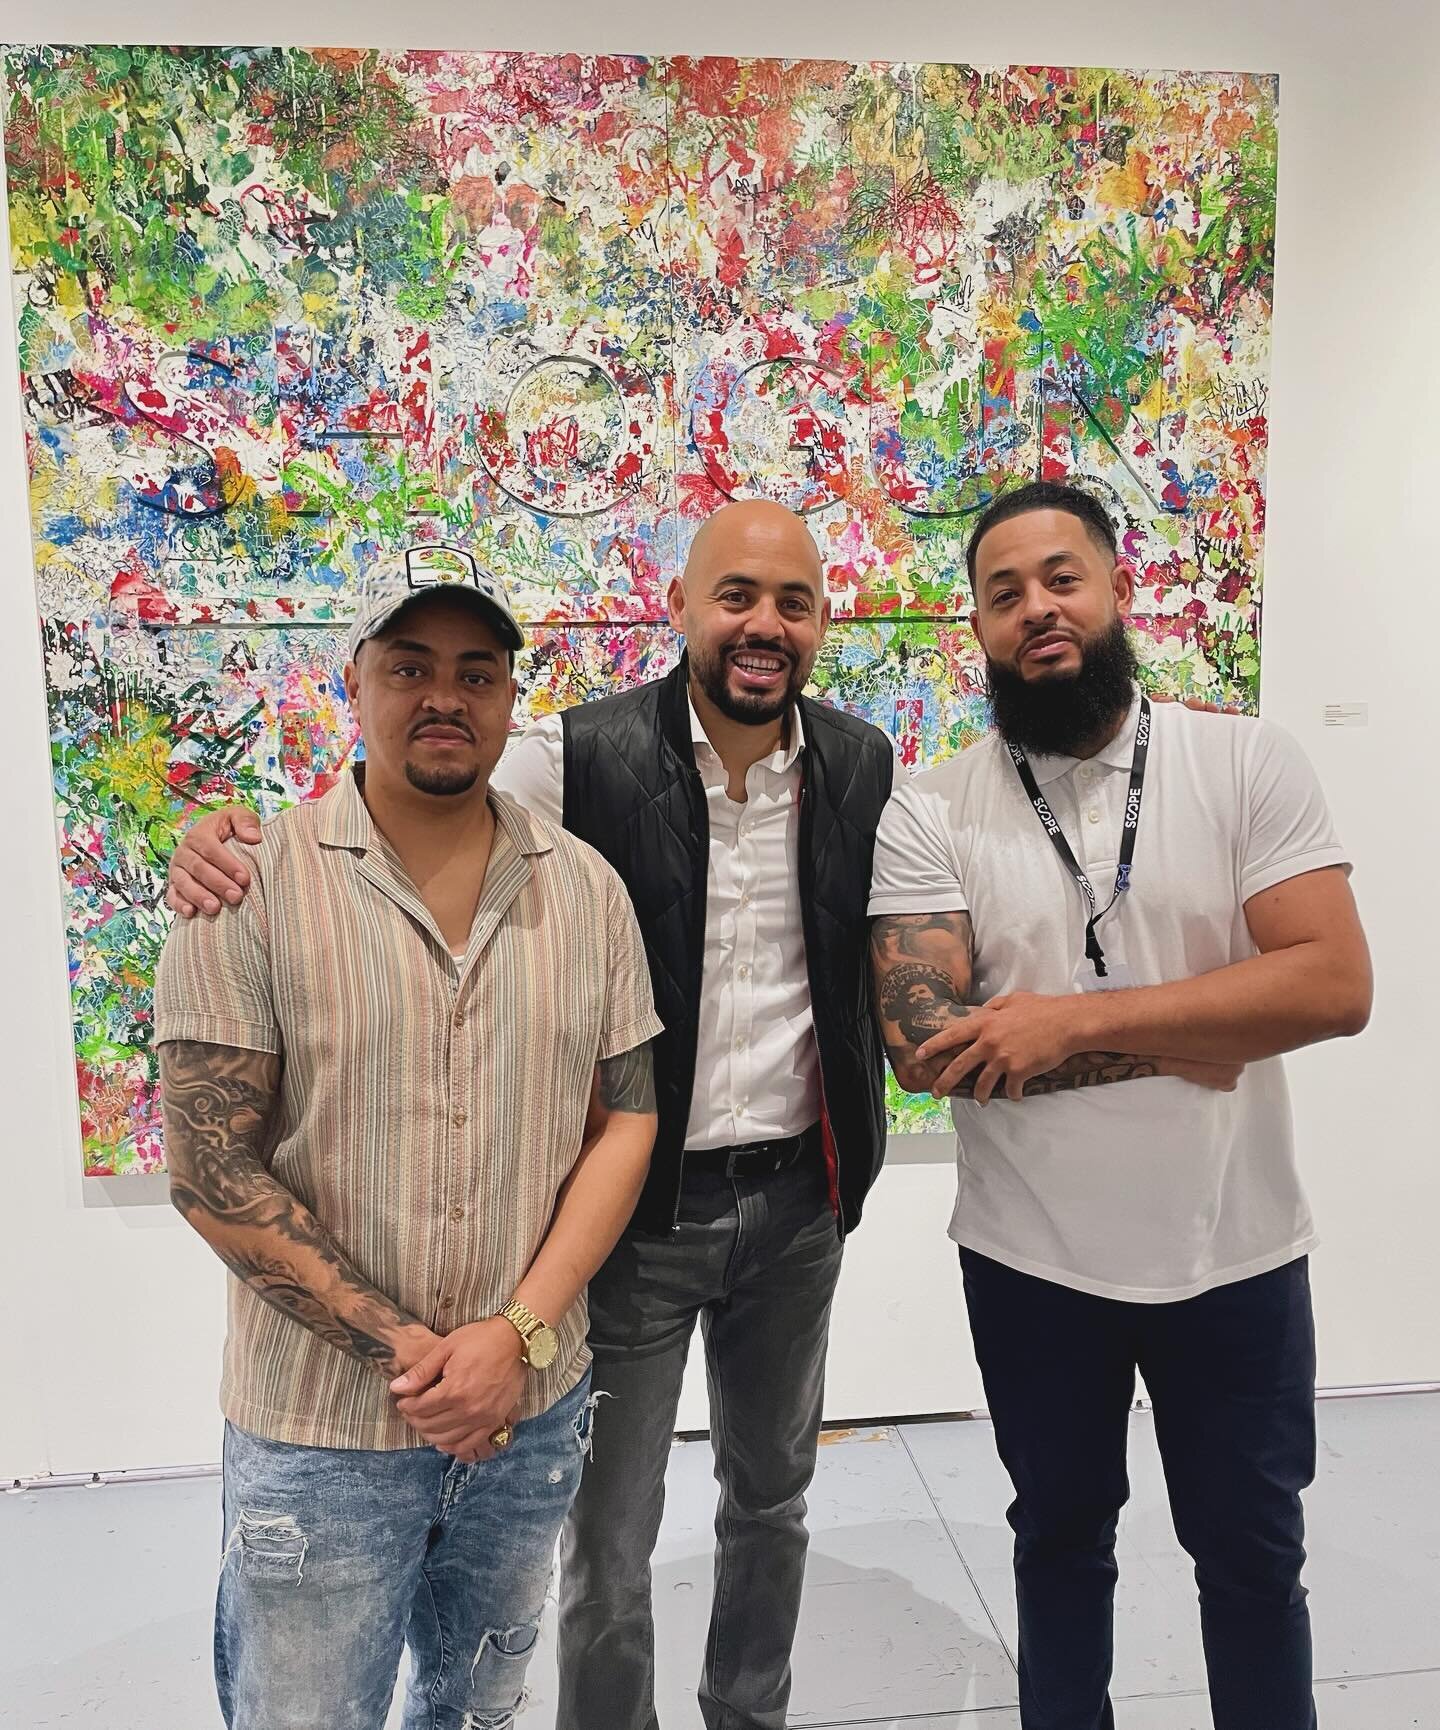 The only thing better than MIA is enjoying the city with family + Art. This is a rare picture of Bedolla brothers enjoying Scope Art Fair.